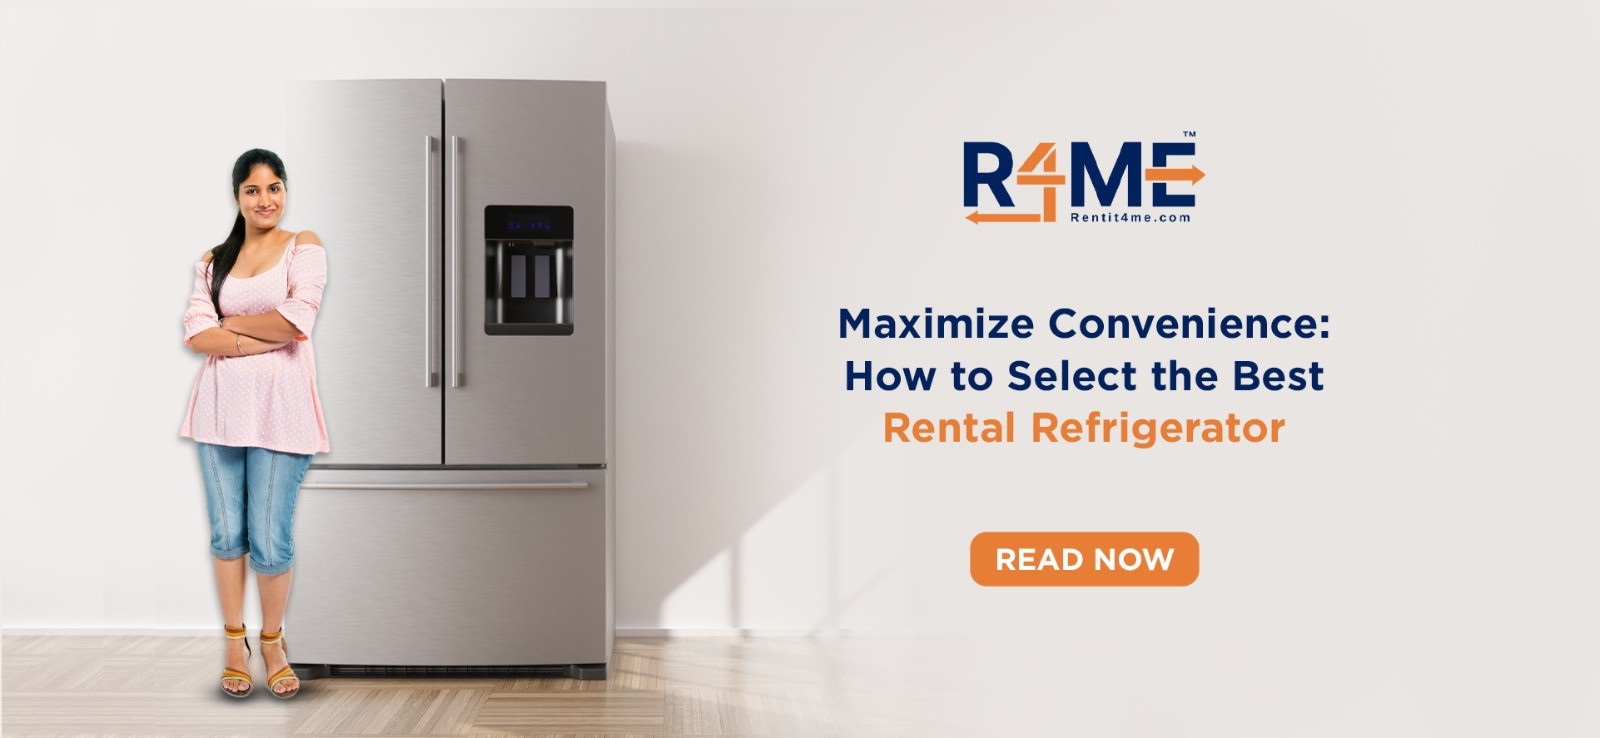 Maximize Convenience: How to Select the Best Rental Refrigerator?